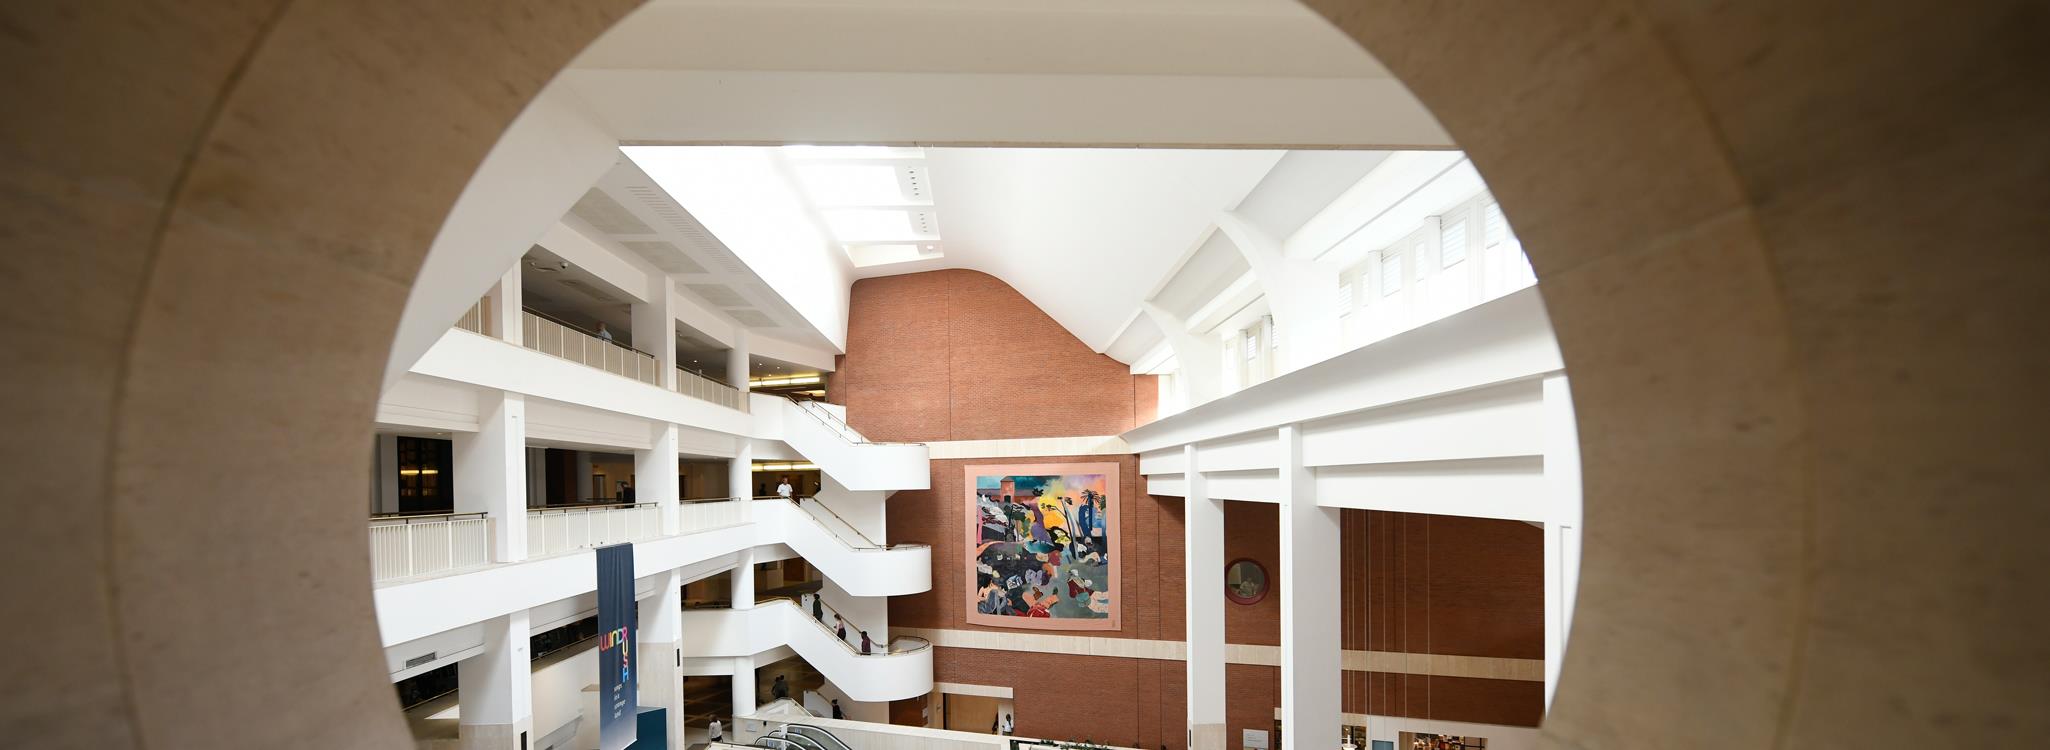 An internal view of the British Library